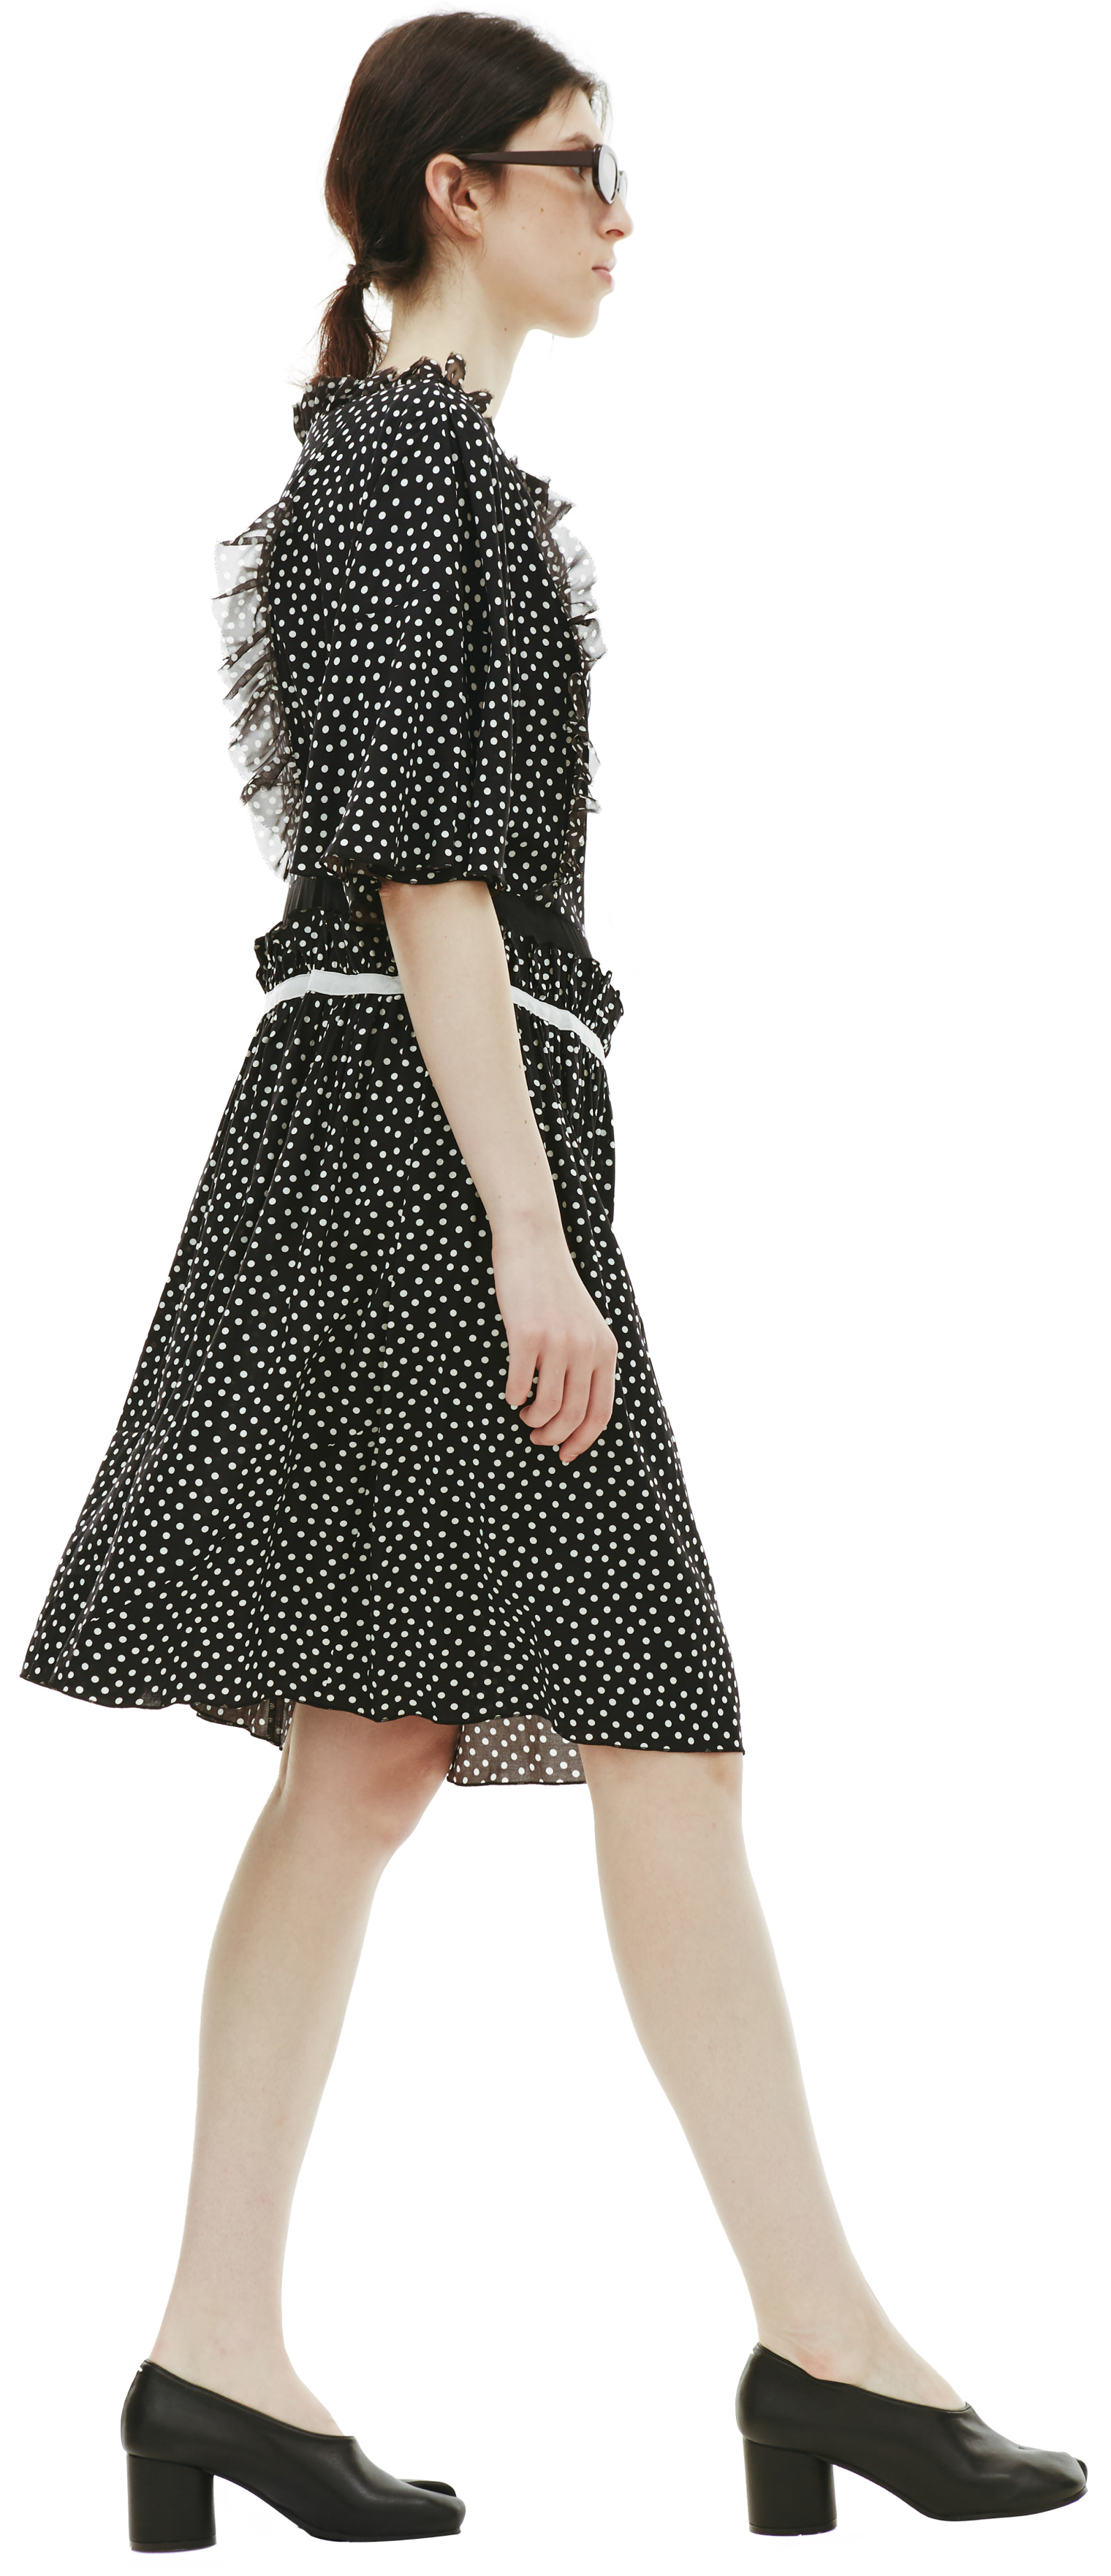 Undercover Polka Dot Dress with Ruffles